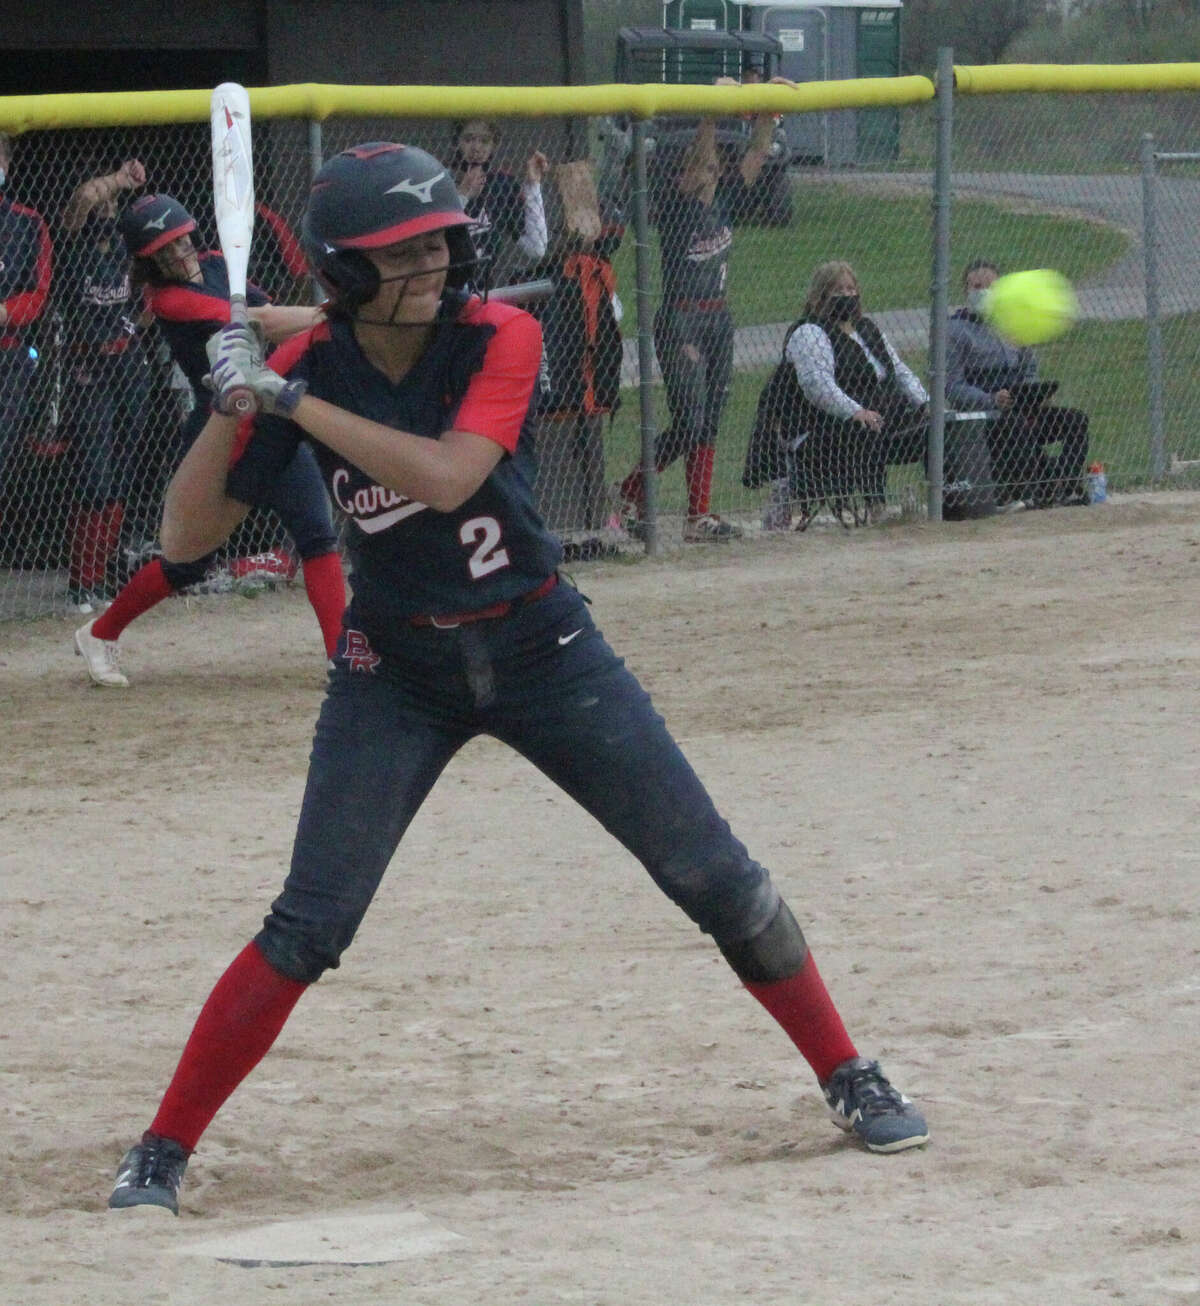 Emma Daum is looking to be an effective hitter for Big Rapids' softball team this season.